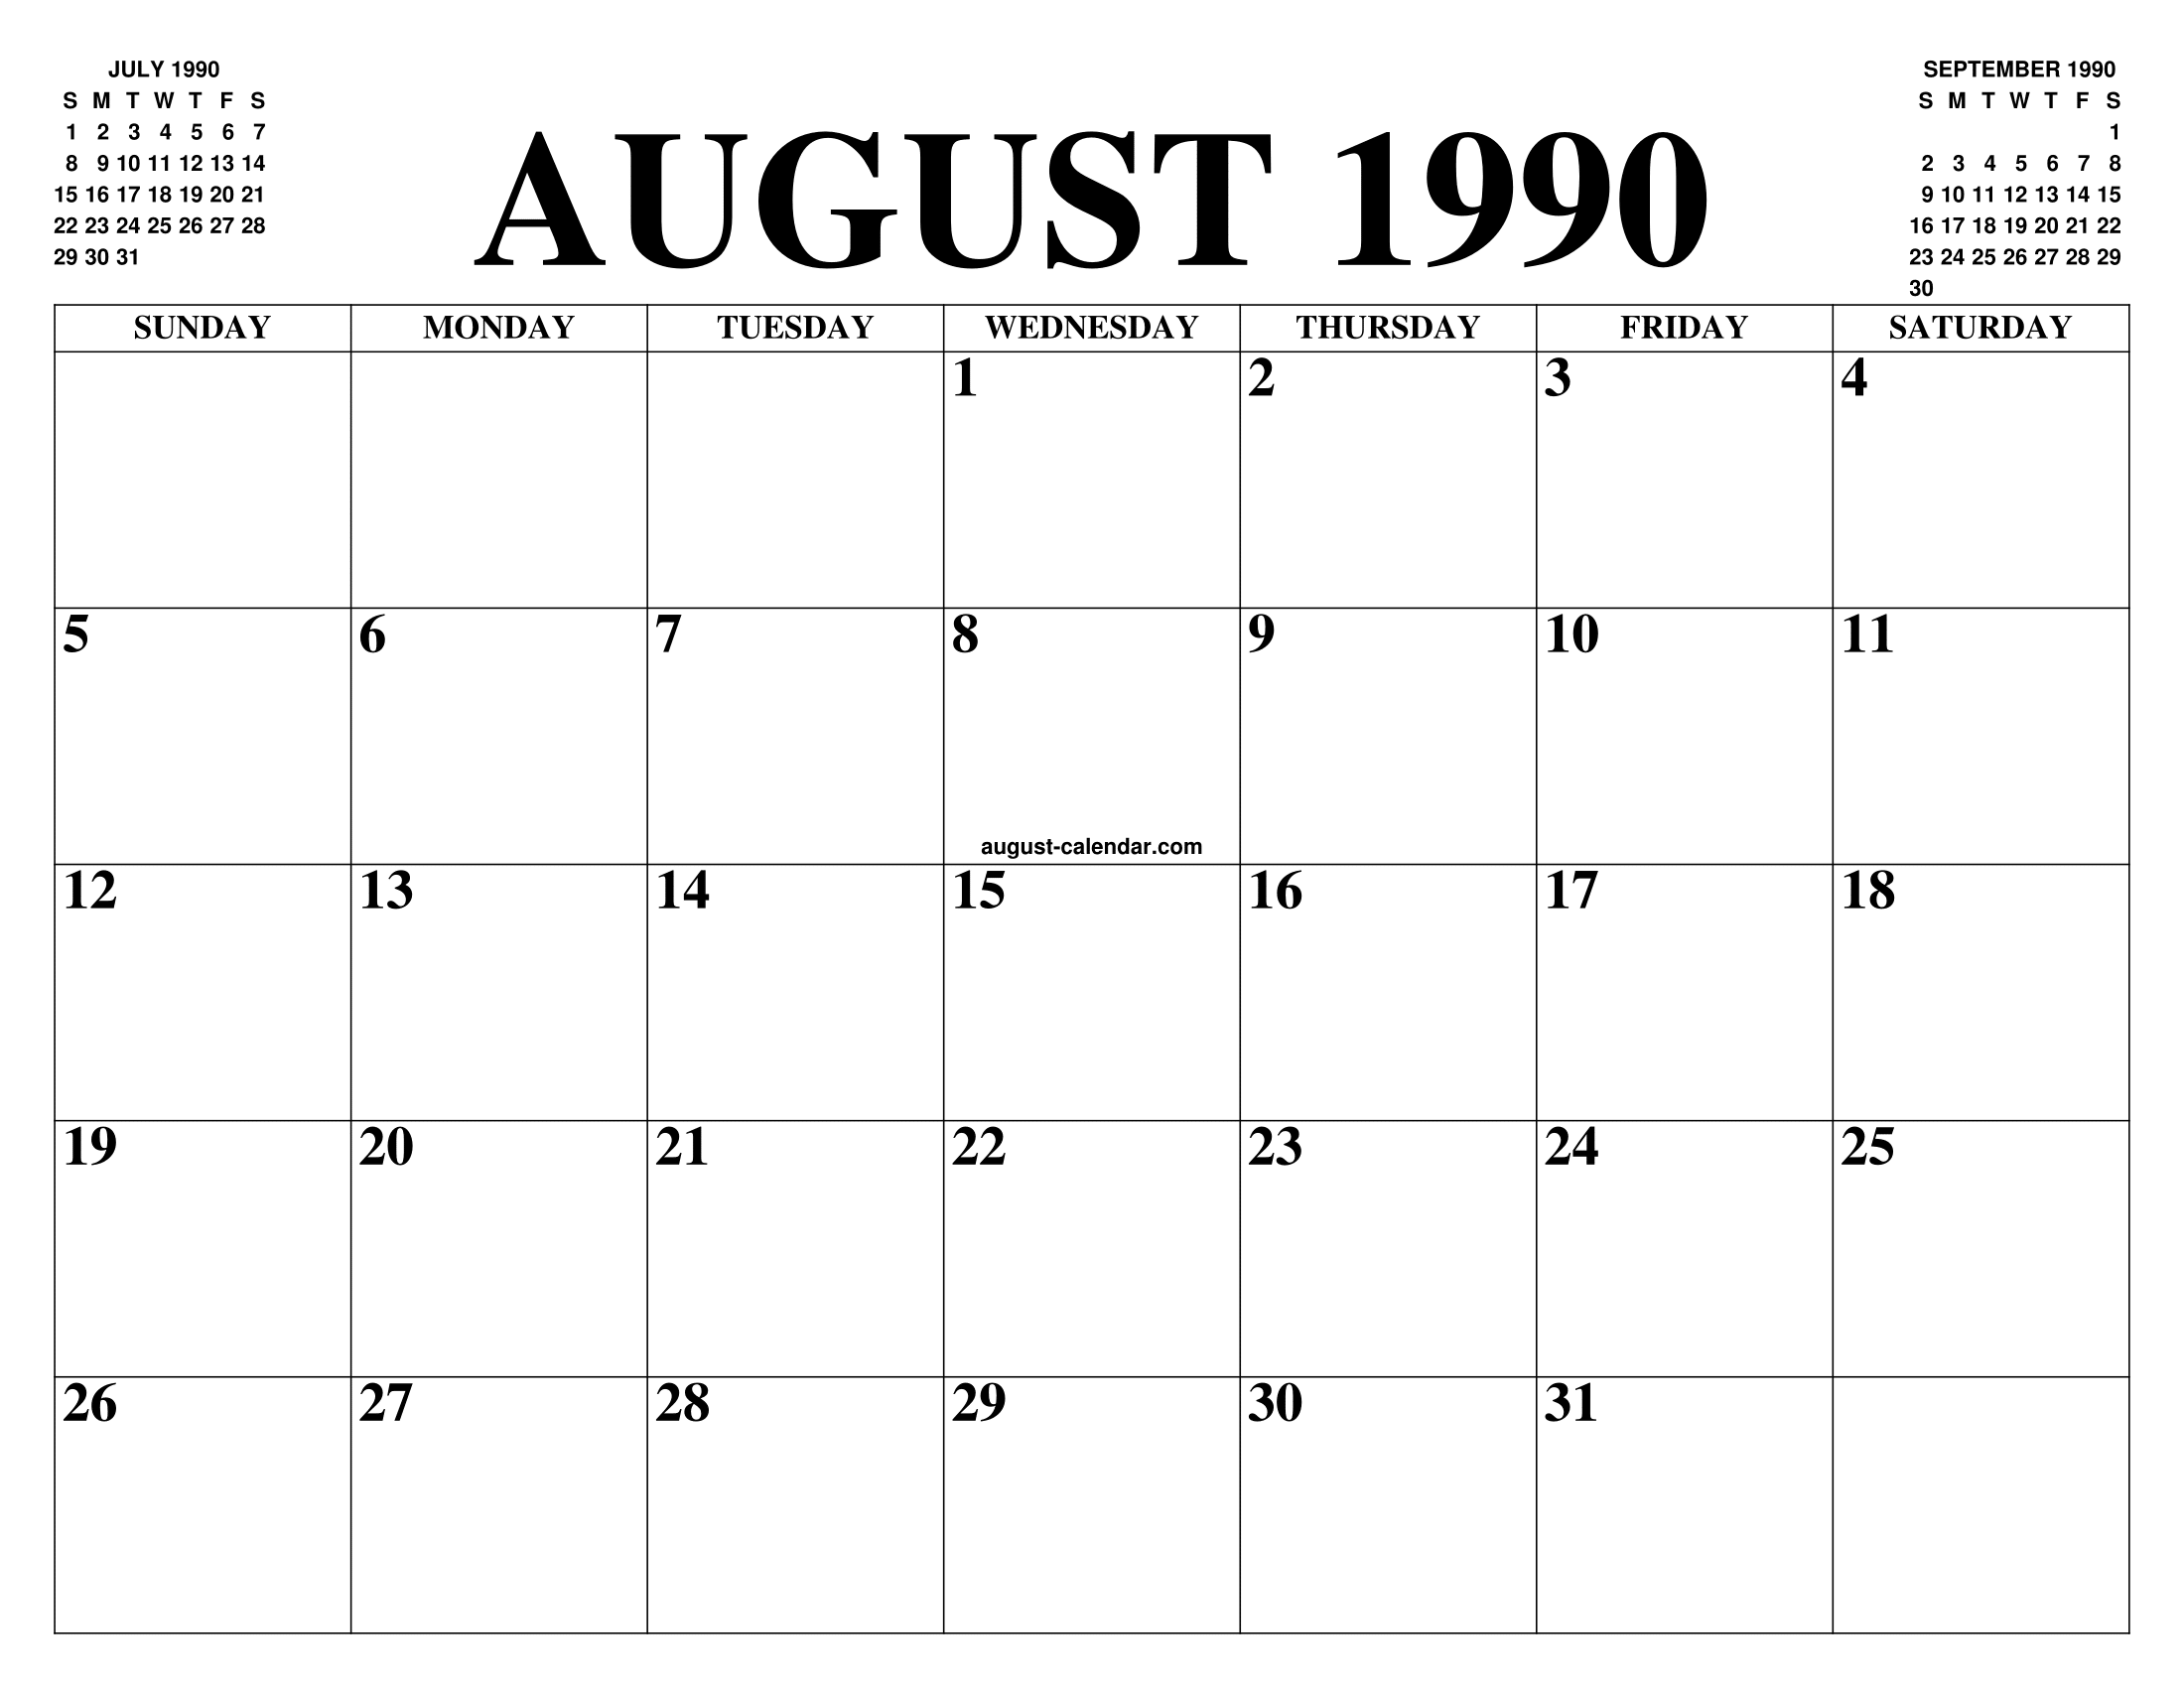 AUGUST 1990 CALENDAR OF THE MONTH: FREE PRINTABLE AUGUST CALENDAR OF